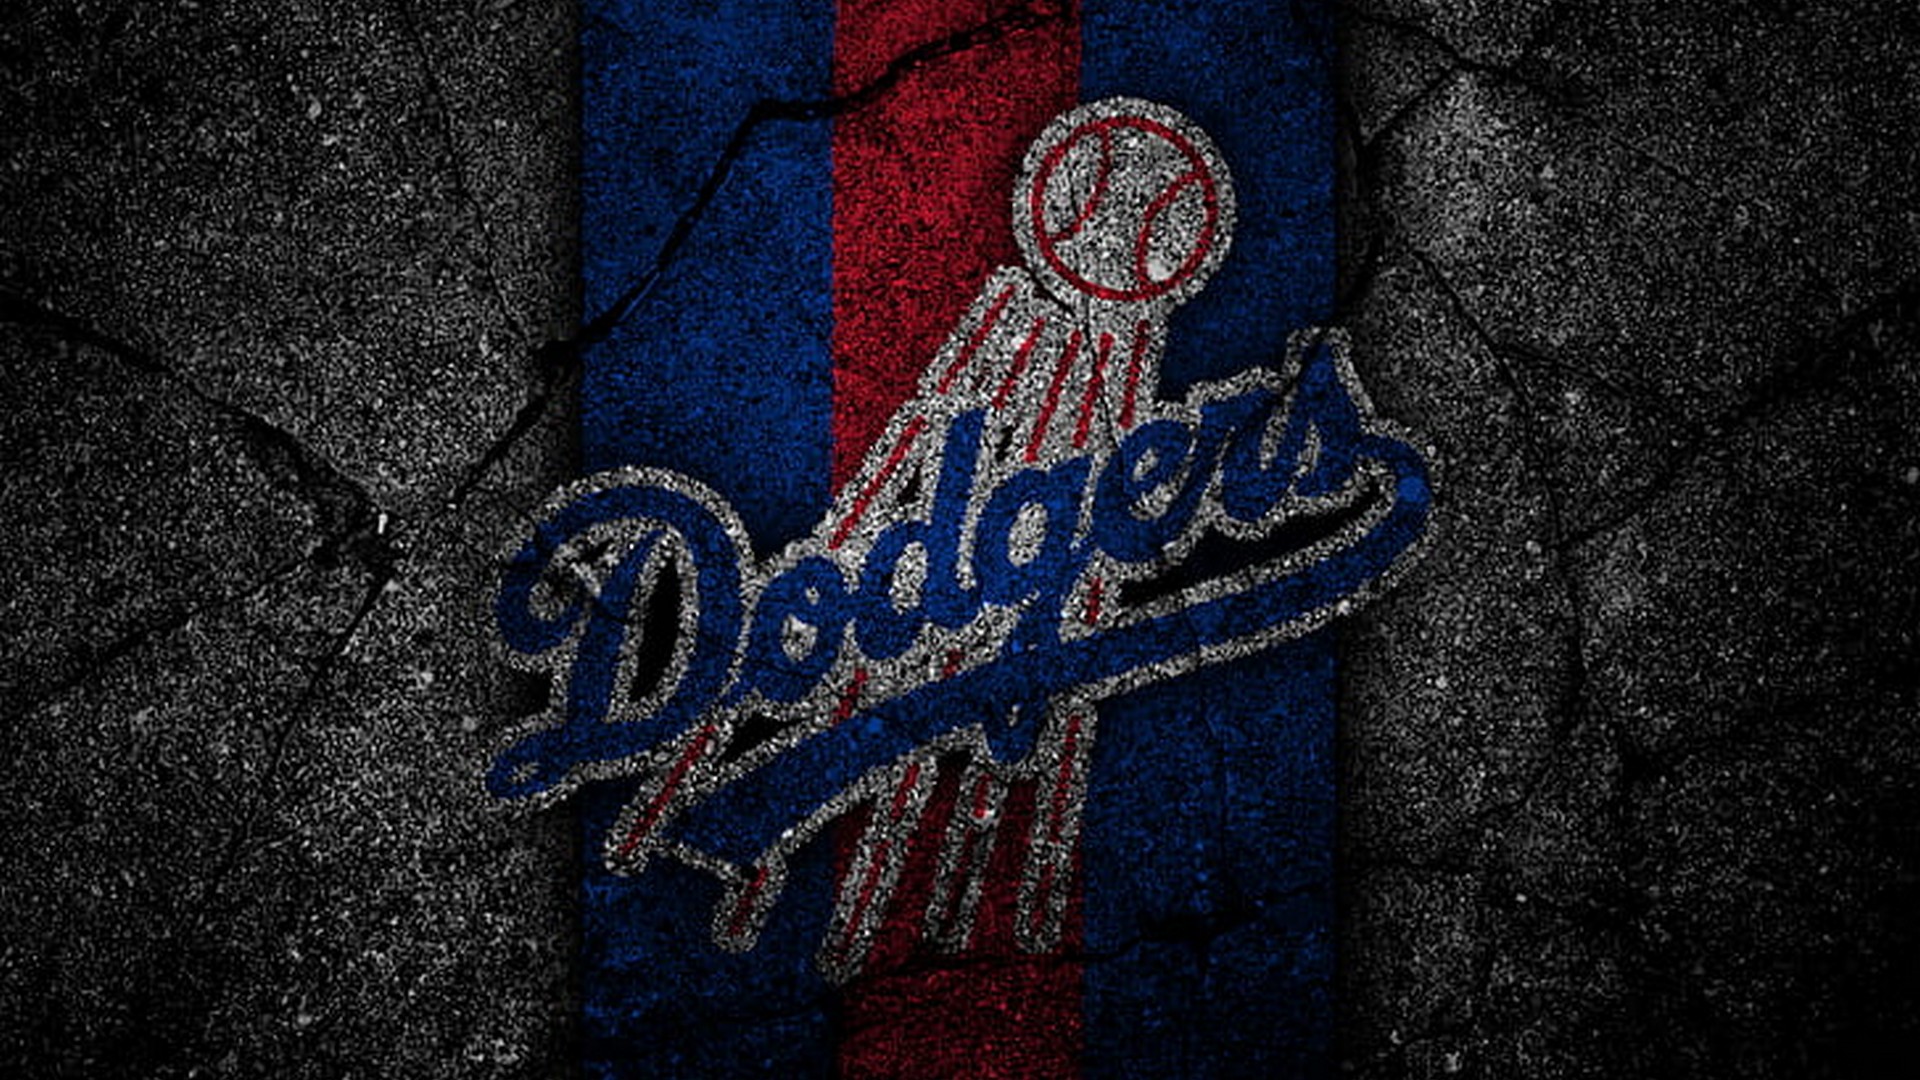 Los Angeles Dodgers Wallpaper HD with high-resolution 1920x1080 pixel. You can use this wallpaper for Mac Desktop Wallpaper, Laptop Screensavers, Android Wallpapers, Tablet or iPhone Home Screen and another mobile phone device